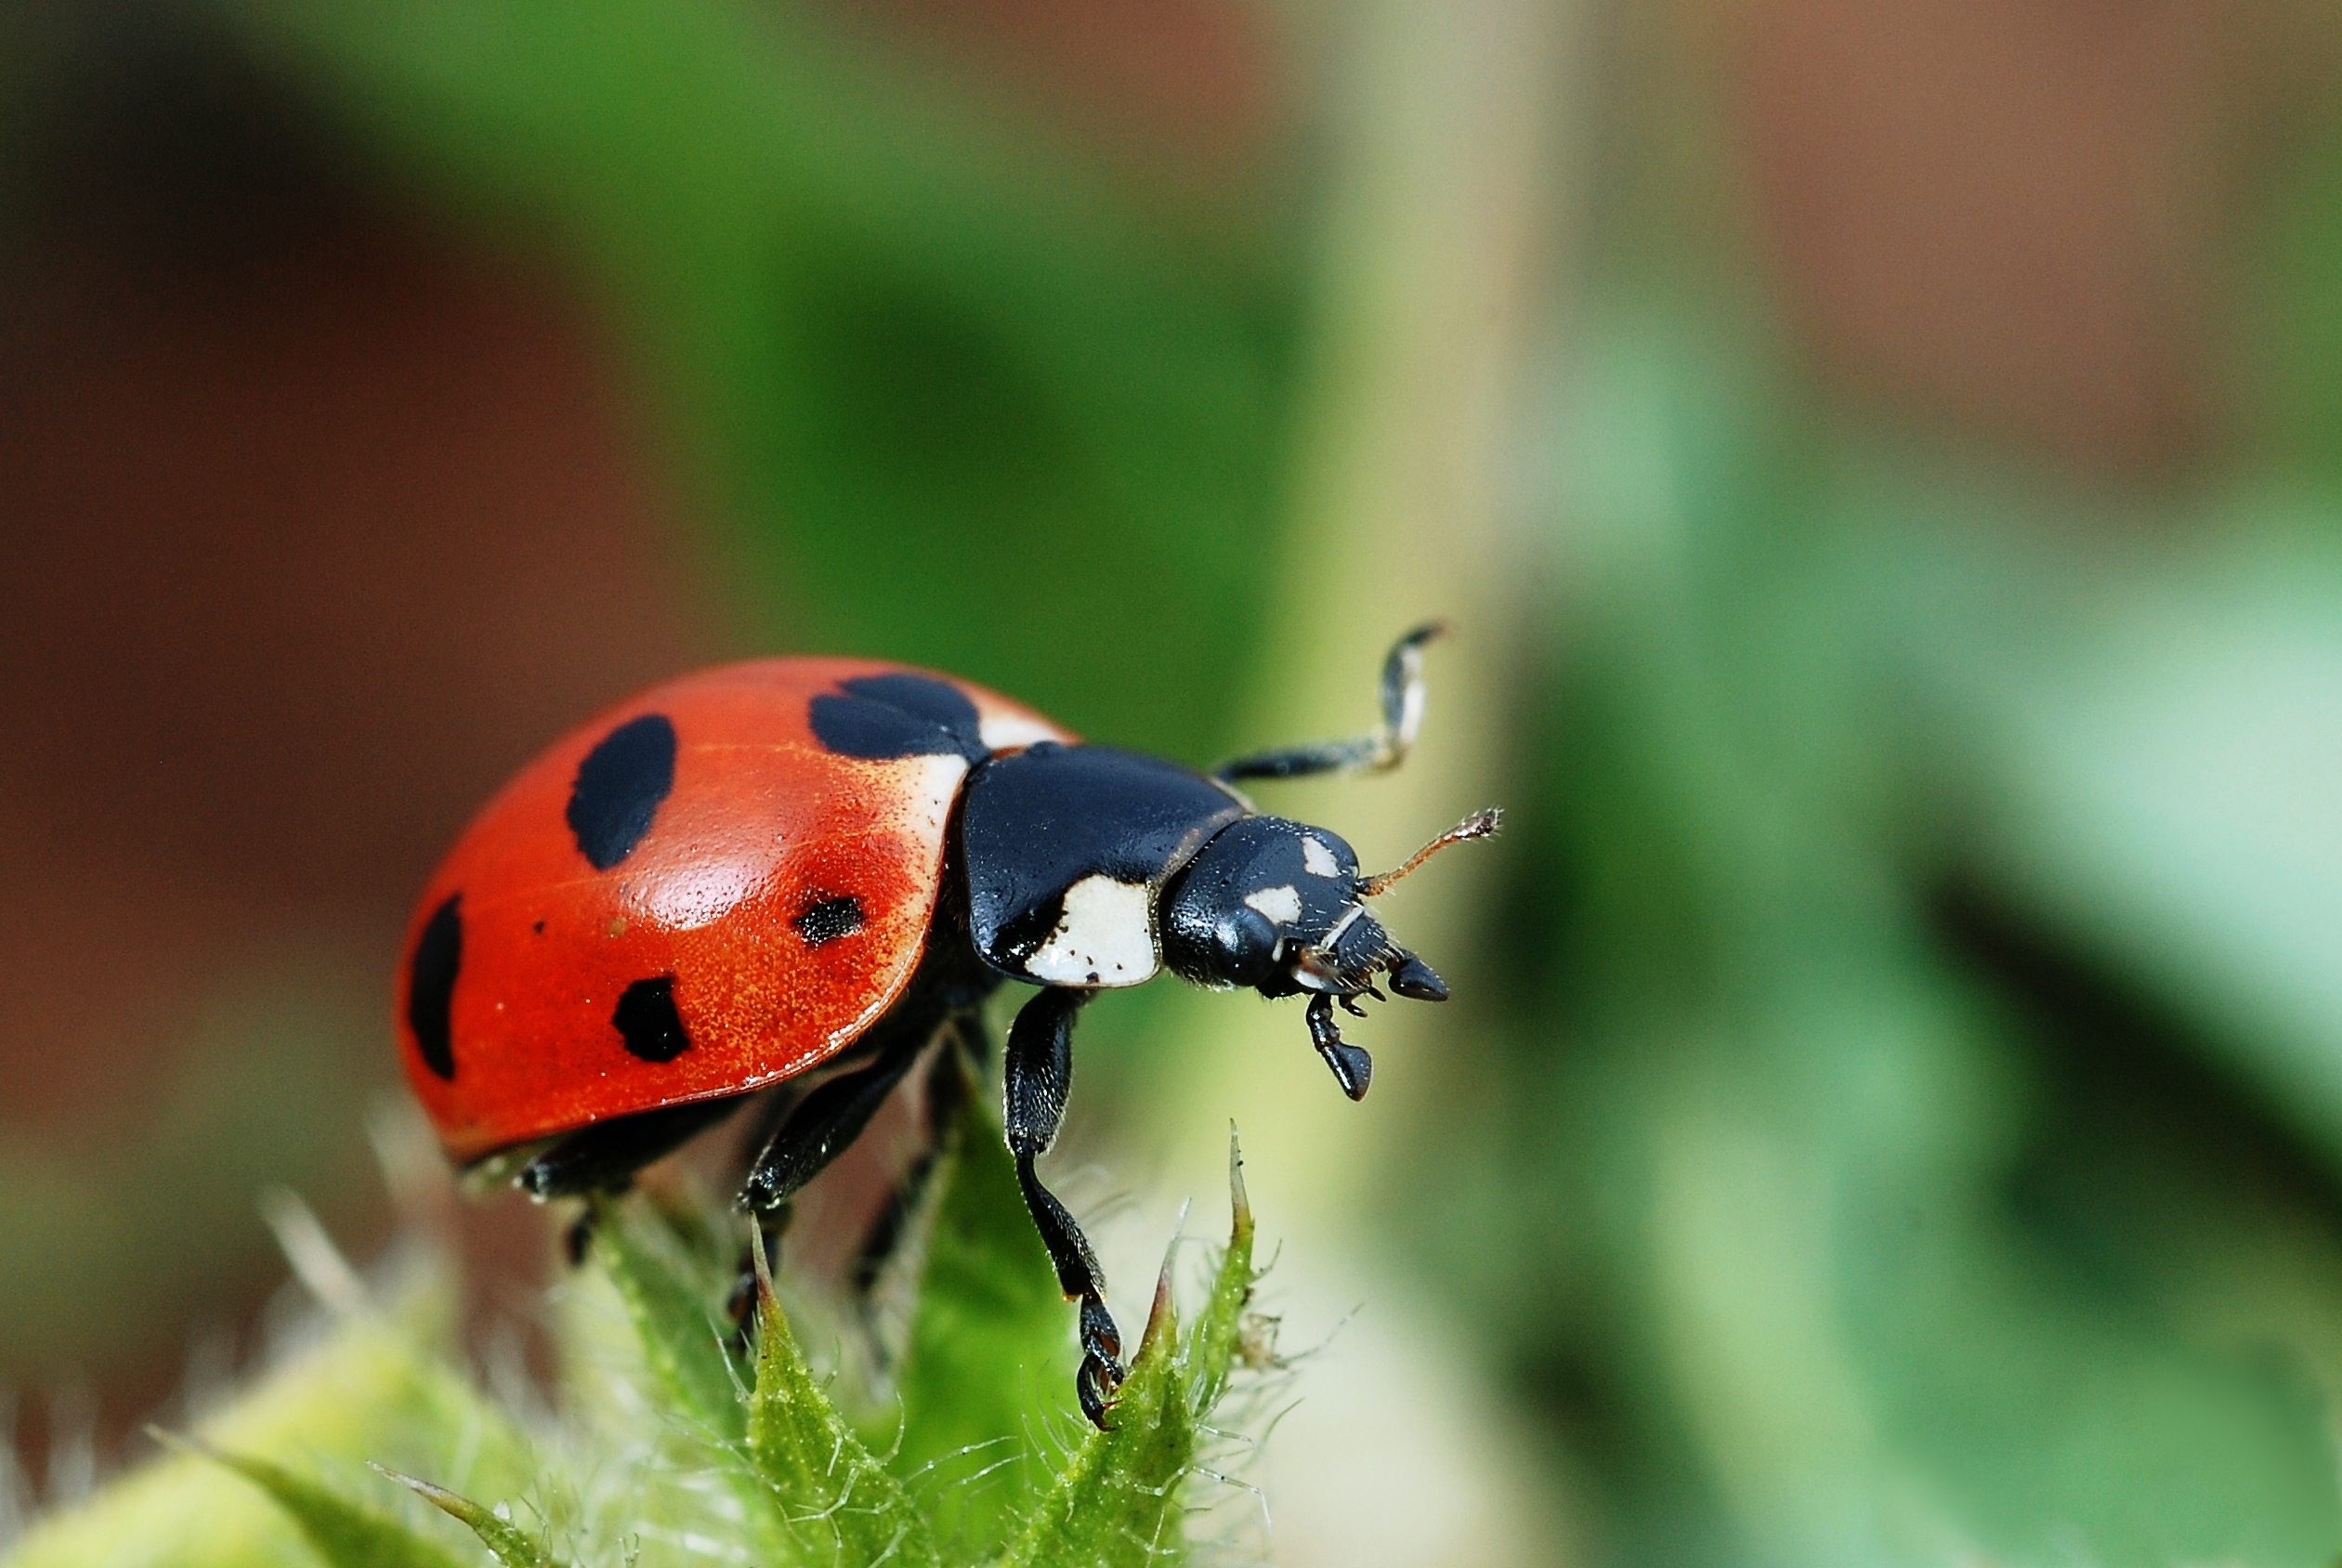 Are black ladybugs bugs or worms?